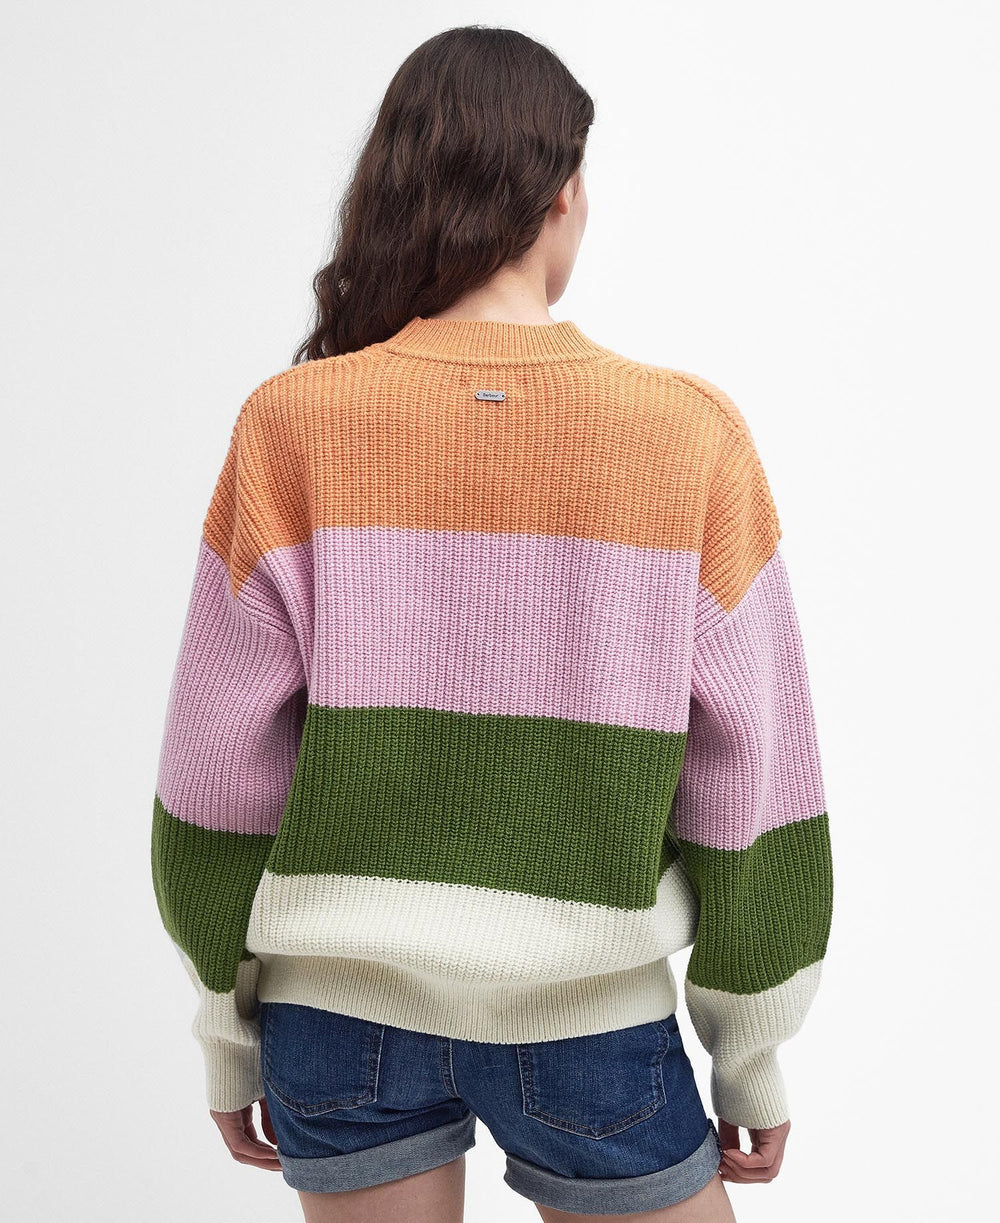 Barbour Ladies Ula Stripe Knitted Jumper#Multi-Coloured